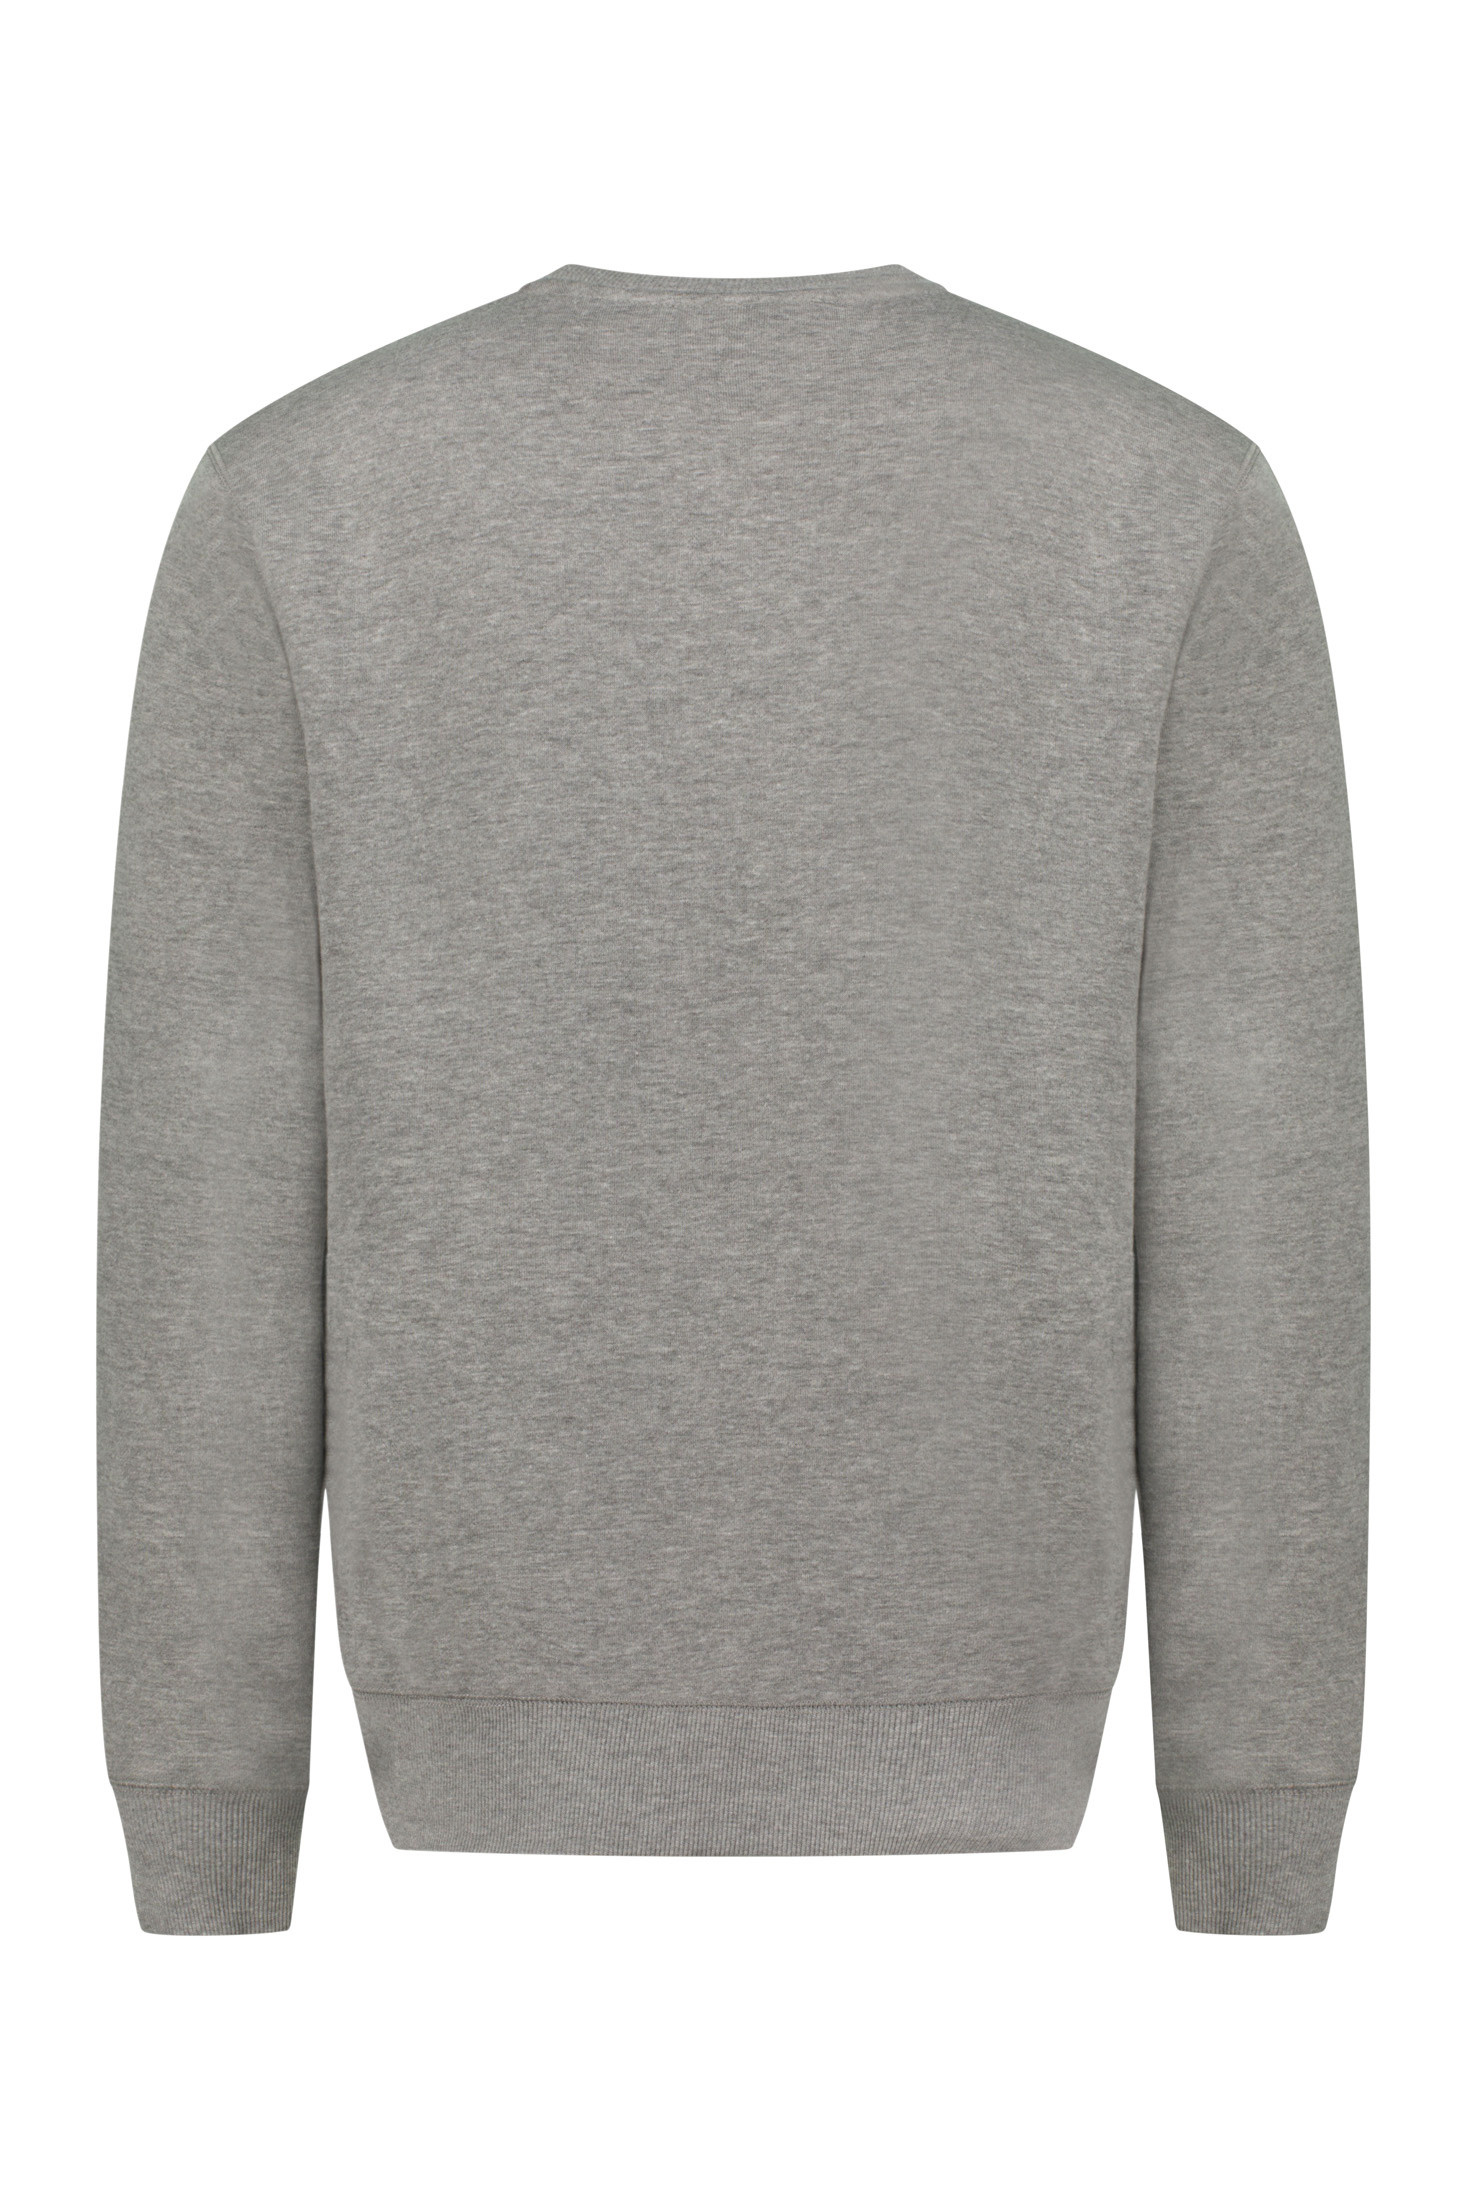 Russell Athletic - Sweatshirt with embroidery, Light Grey, large image number 1